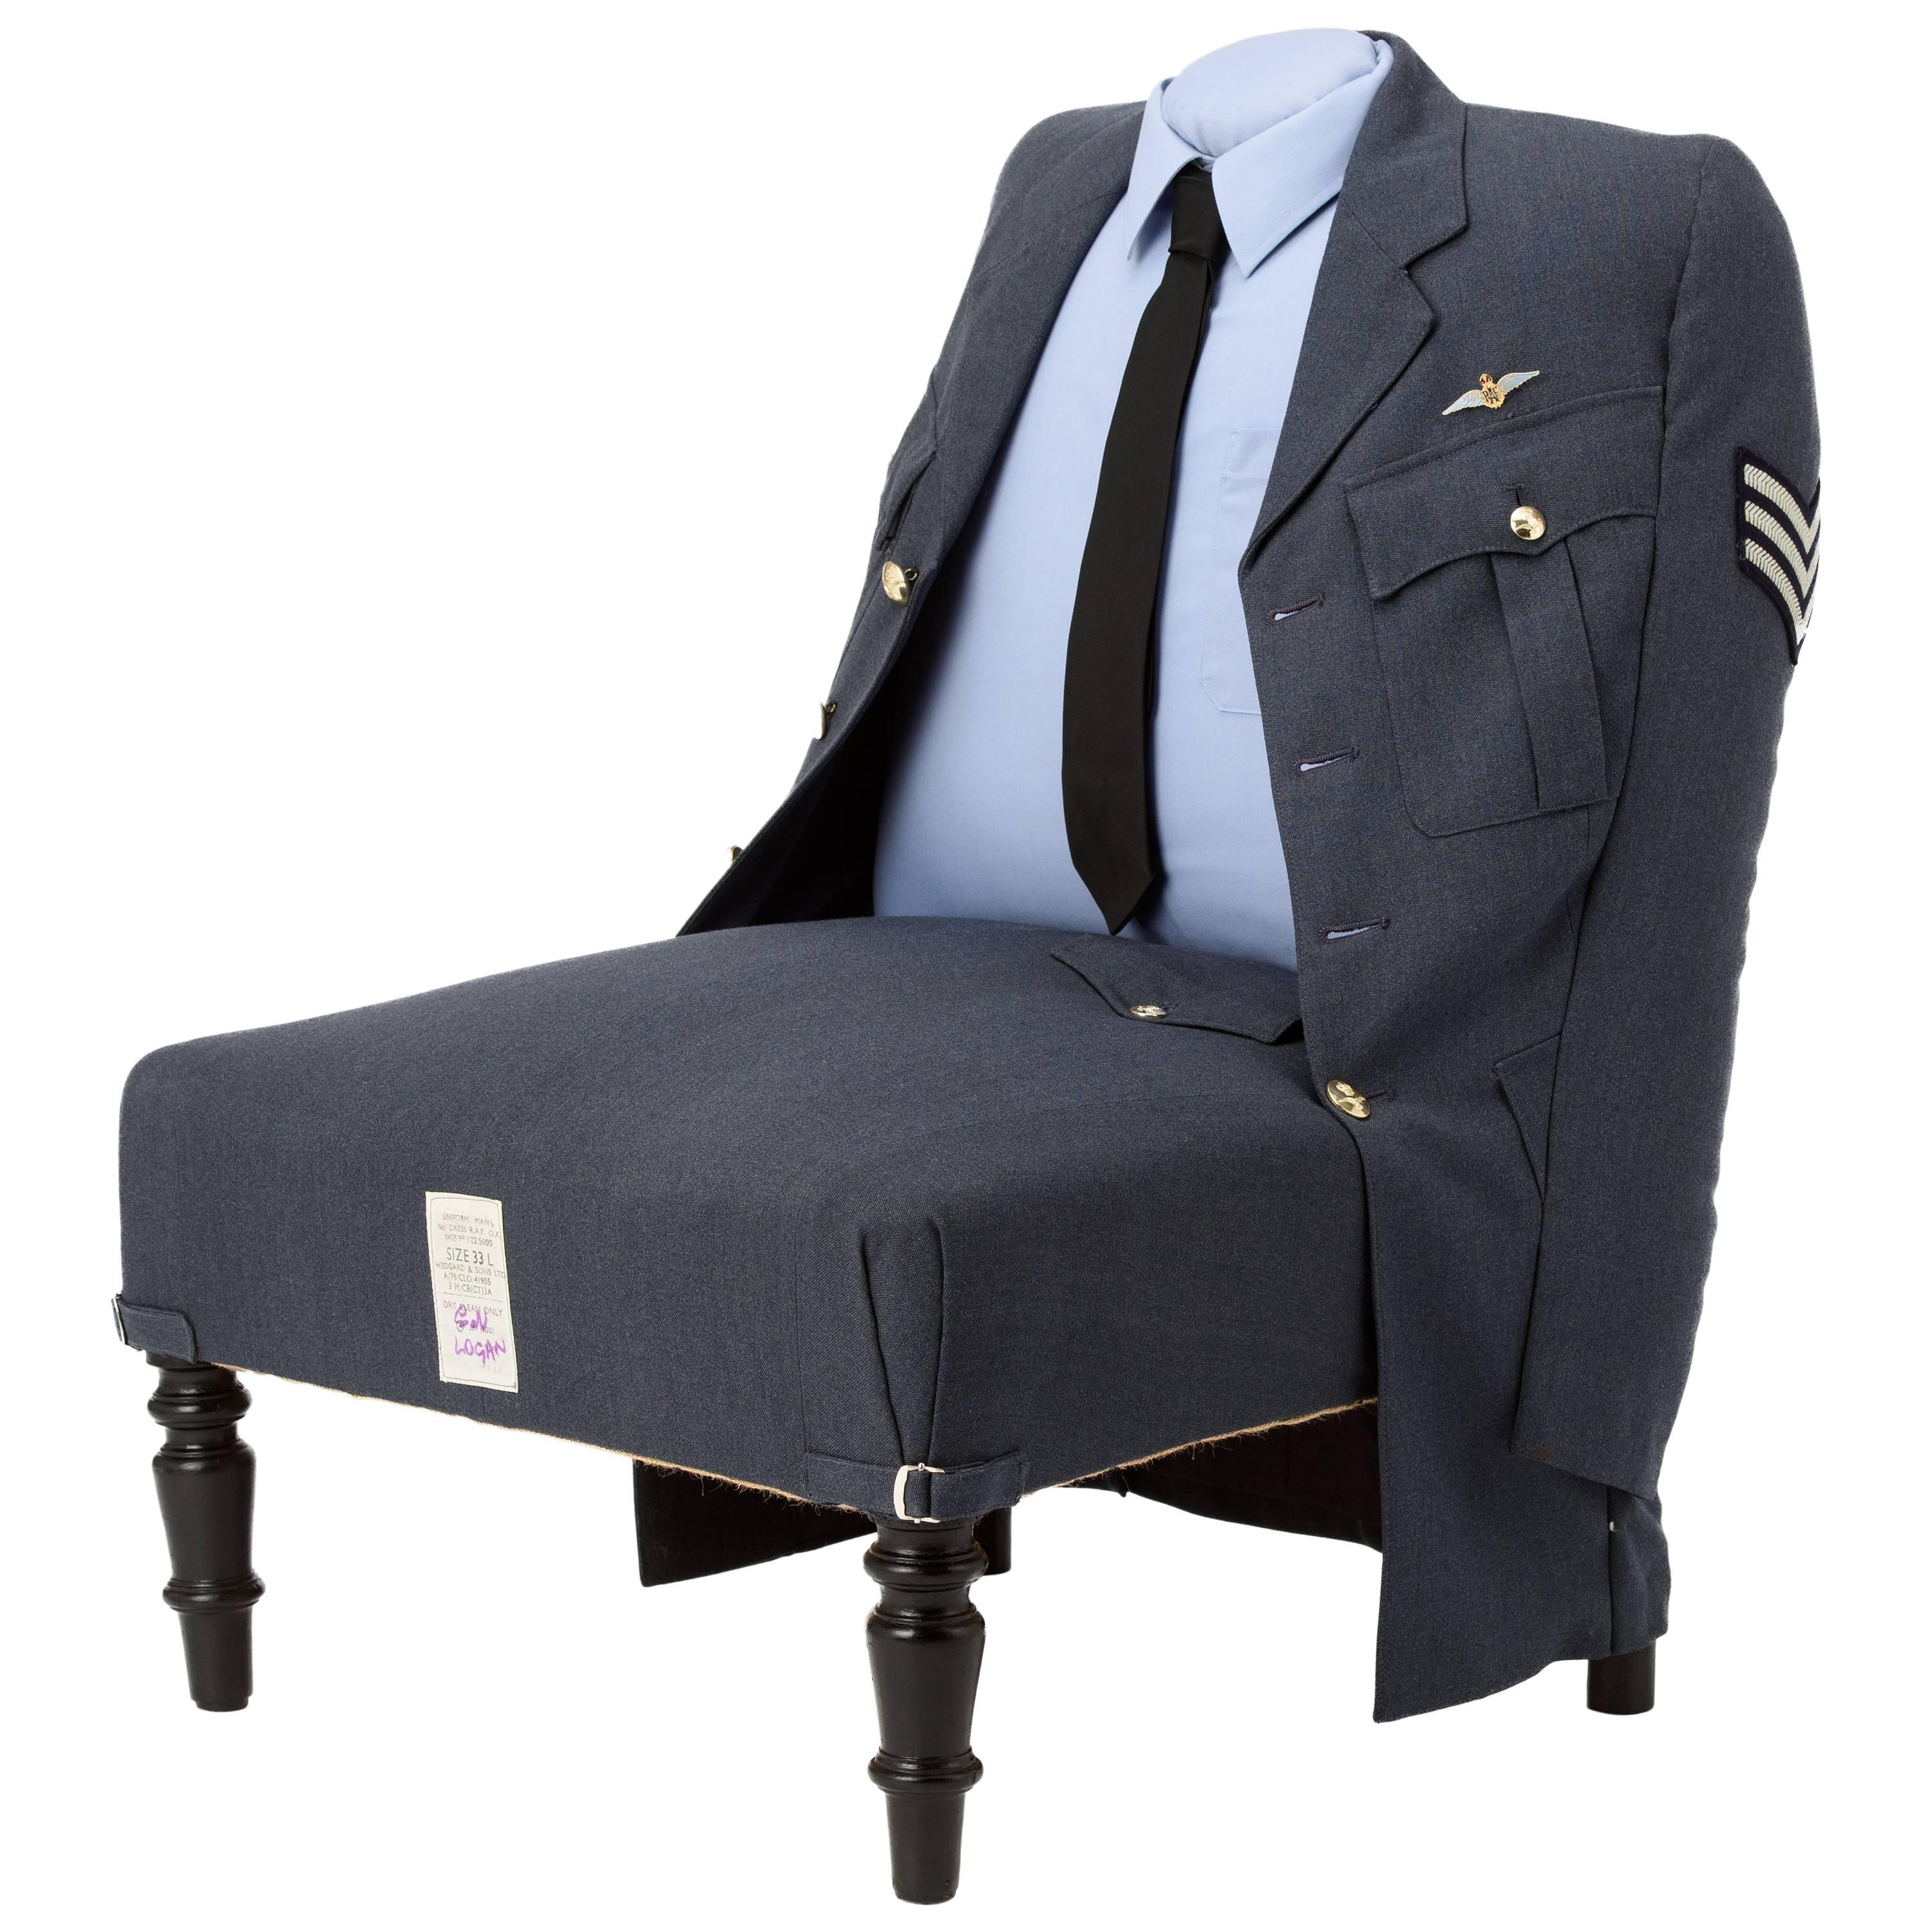 The Royal Air Force Uniform Chair  For Sale